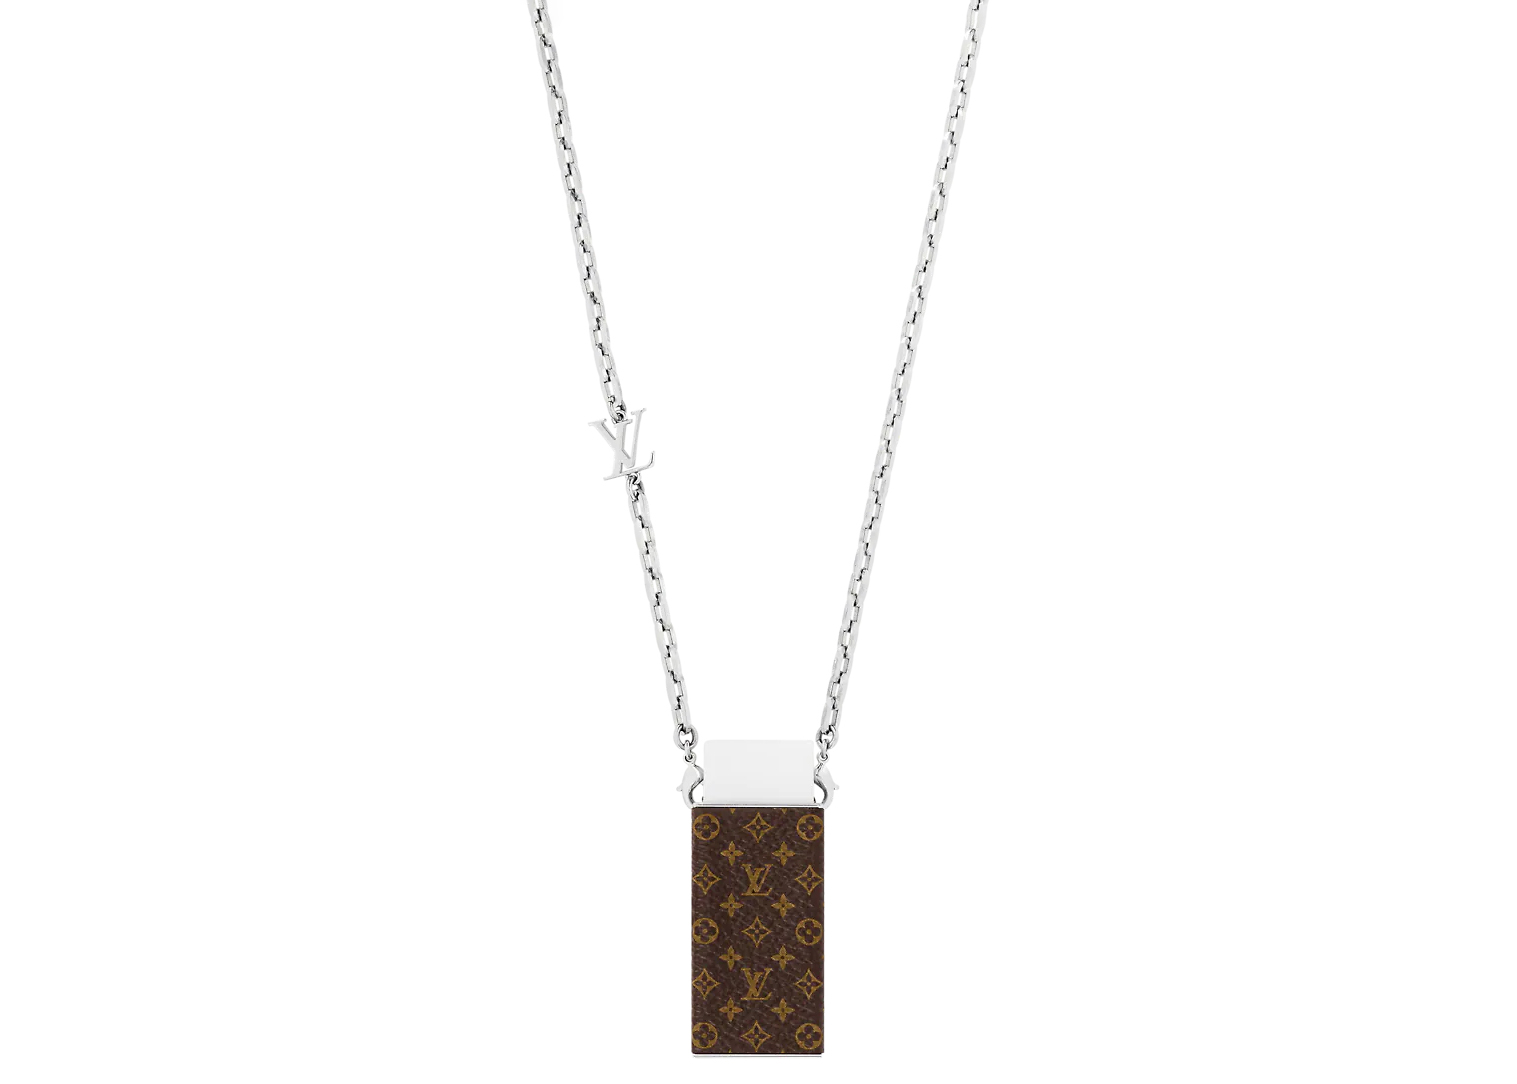 Louis Vuitton Eraser Necklace SilverBrown in Silver Metal with Silvertone   US